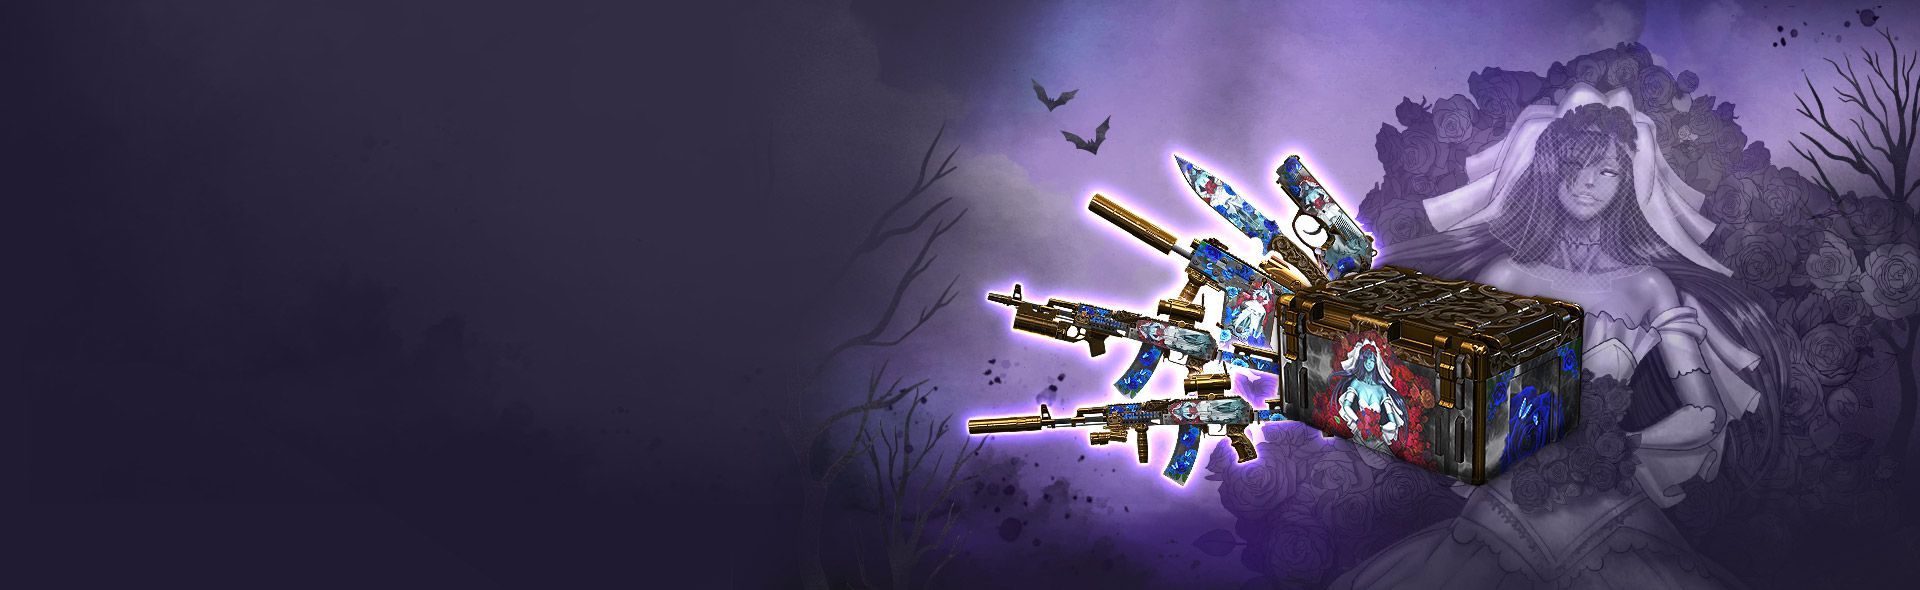 New Weapon Update!<br />[Vow of Death] GHOST BRIDE<br />27 Oct 2022 - 1 Dec 2022